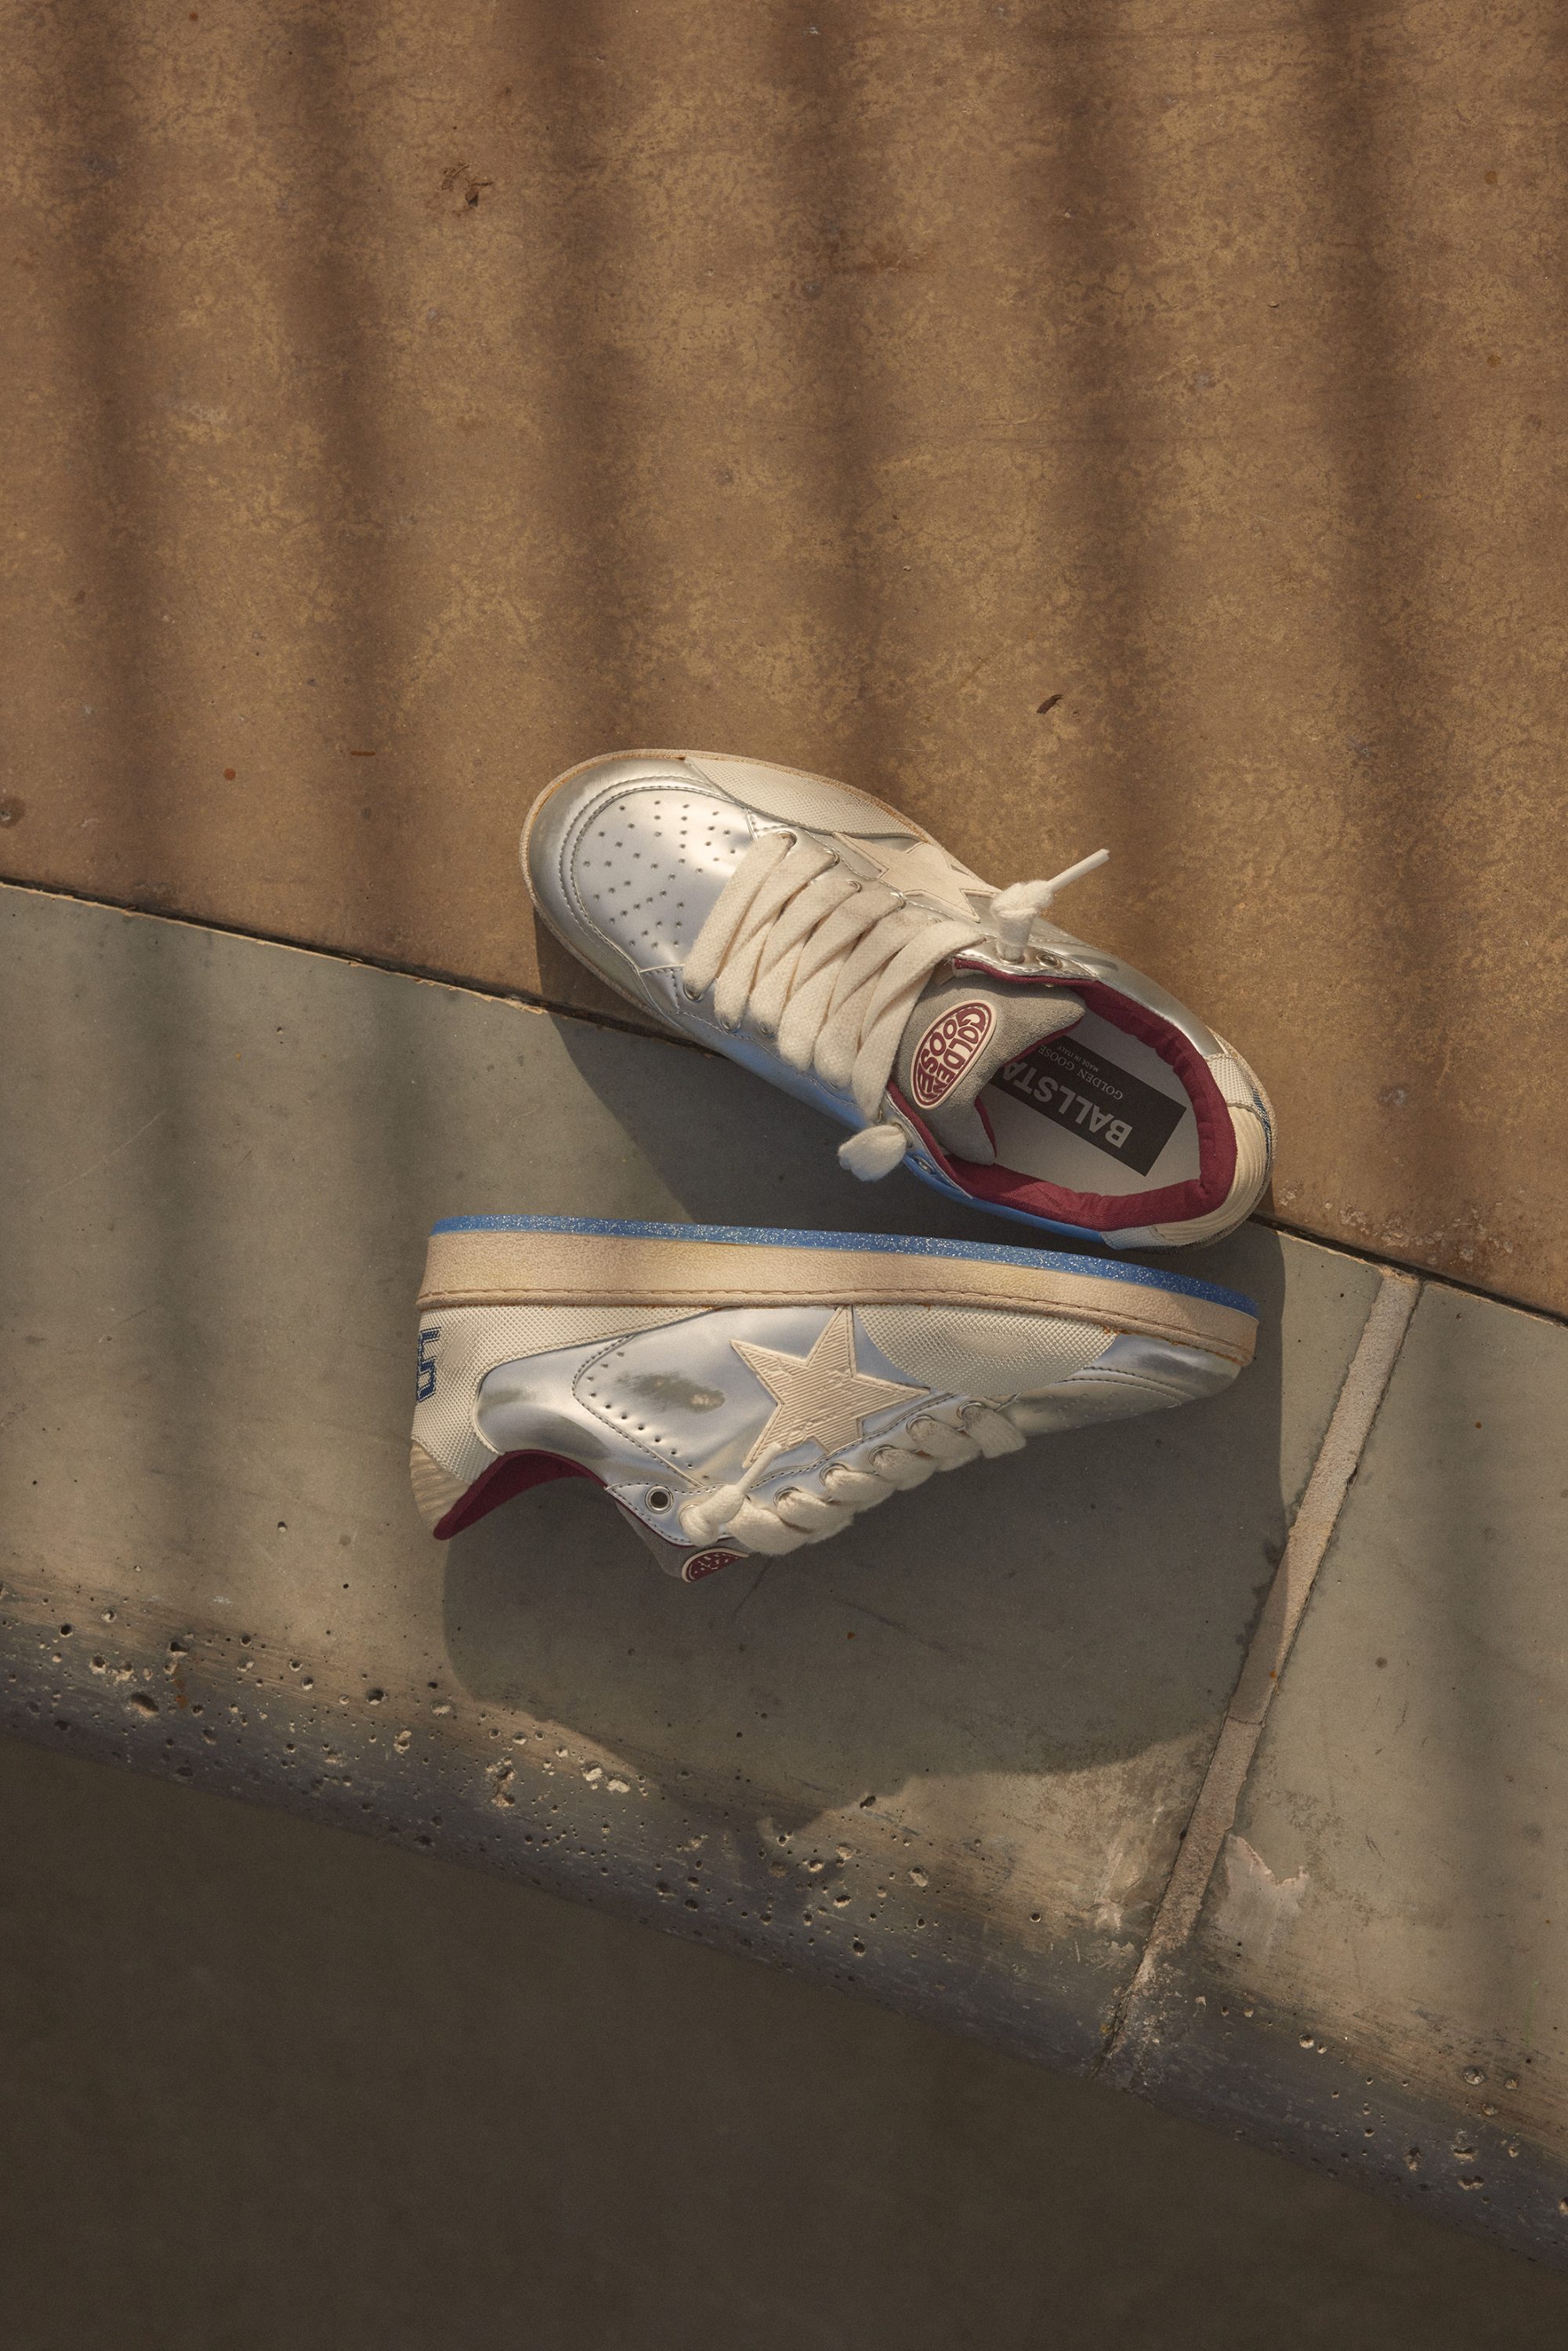 Golden Goose collaborates with Cory Juneau for Limited Edition Ball Star Pro Sneaker